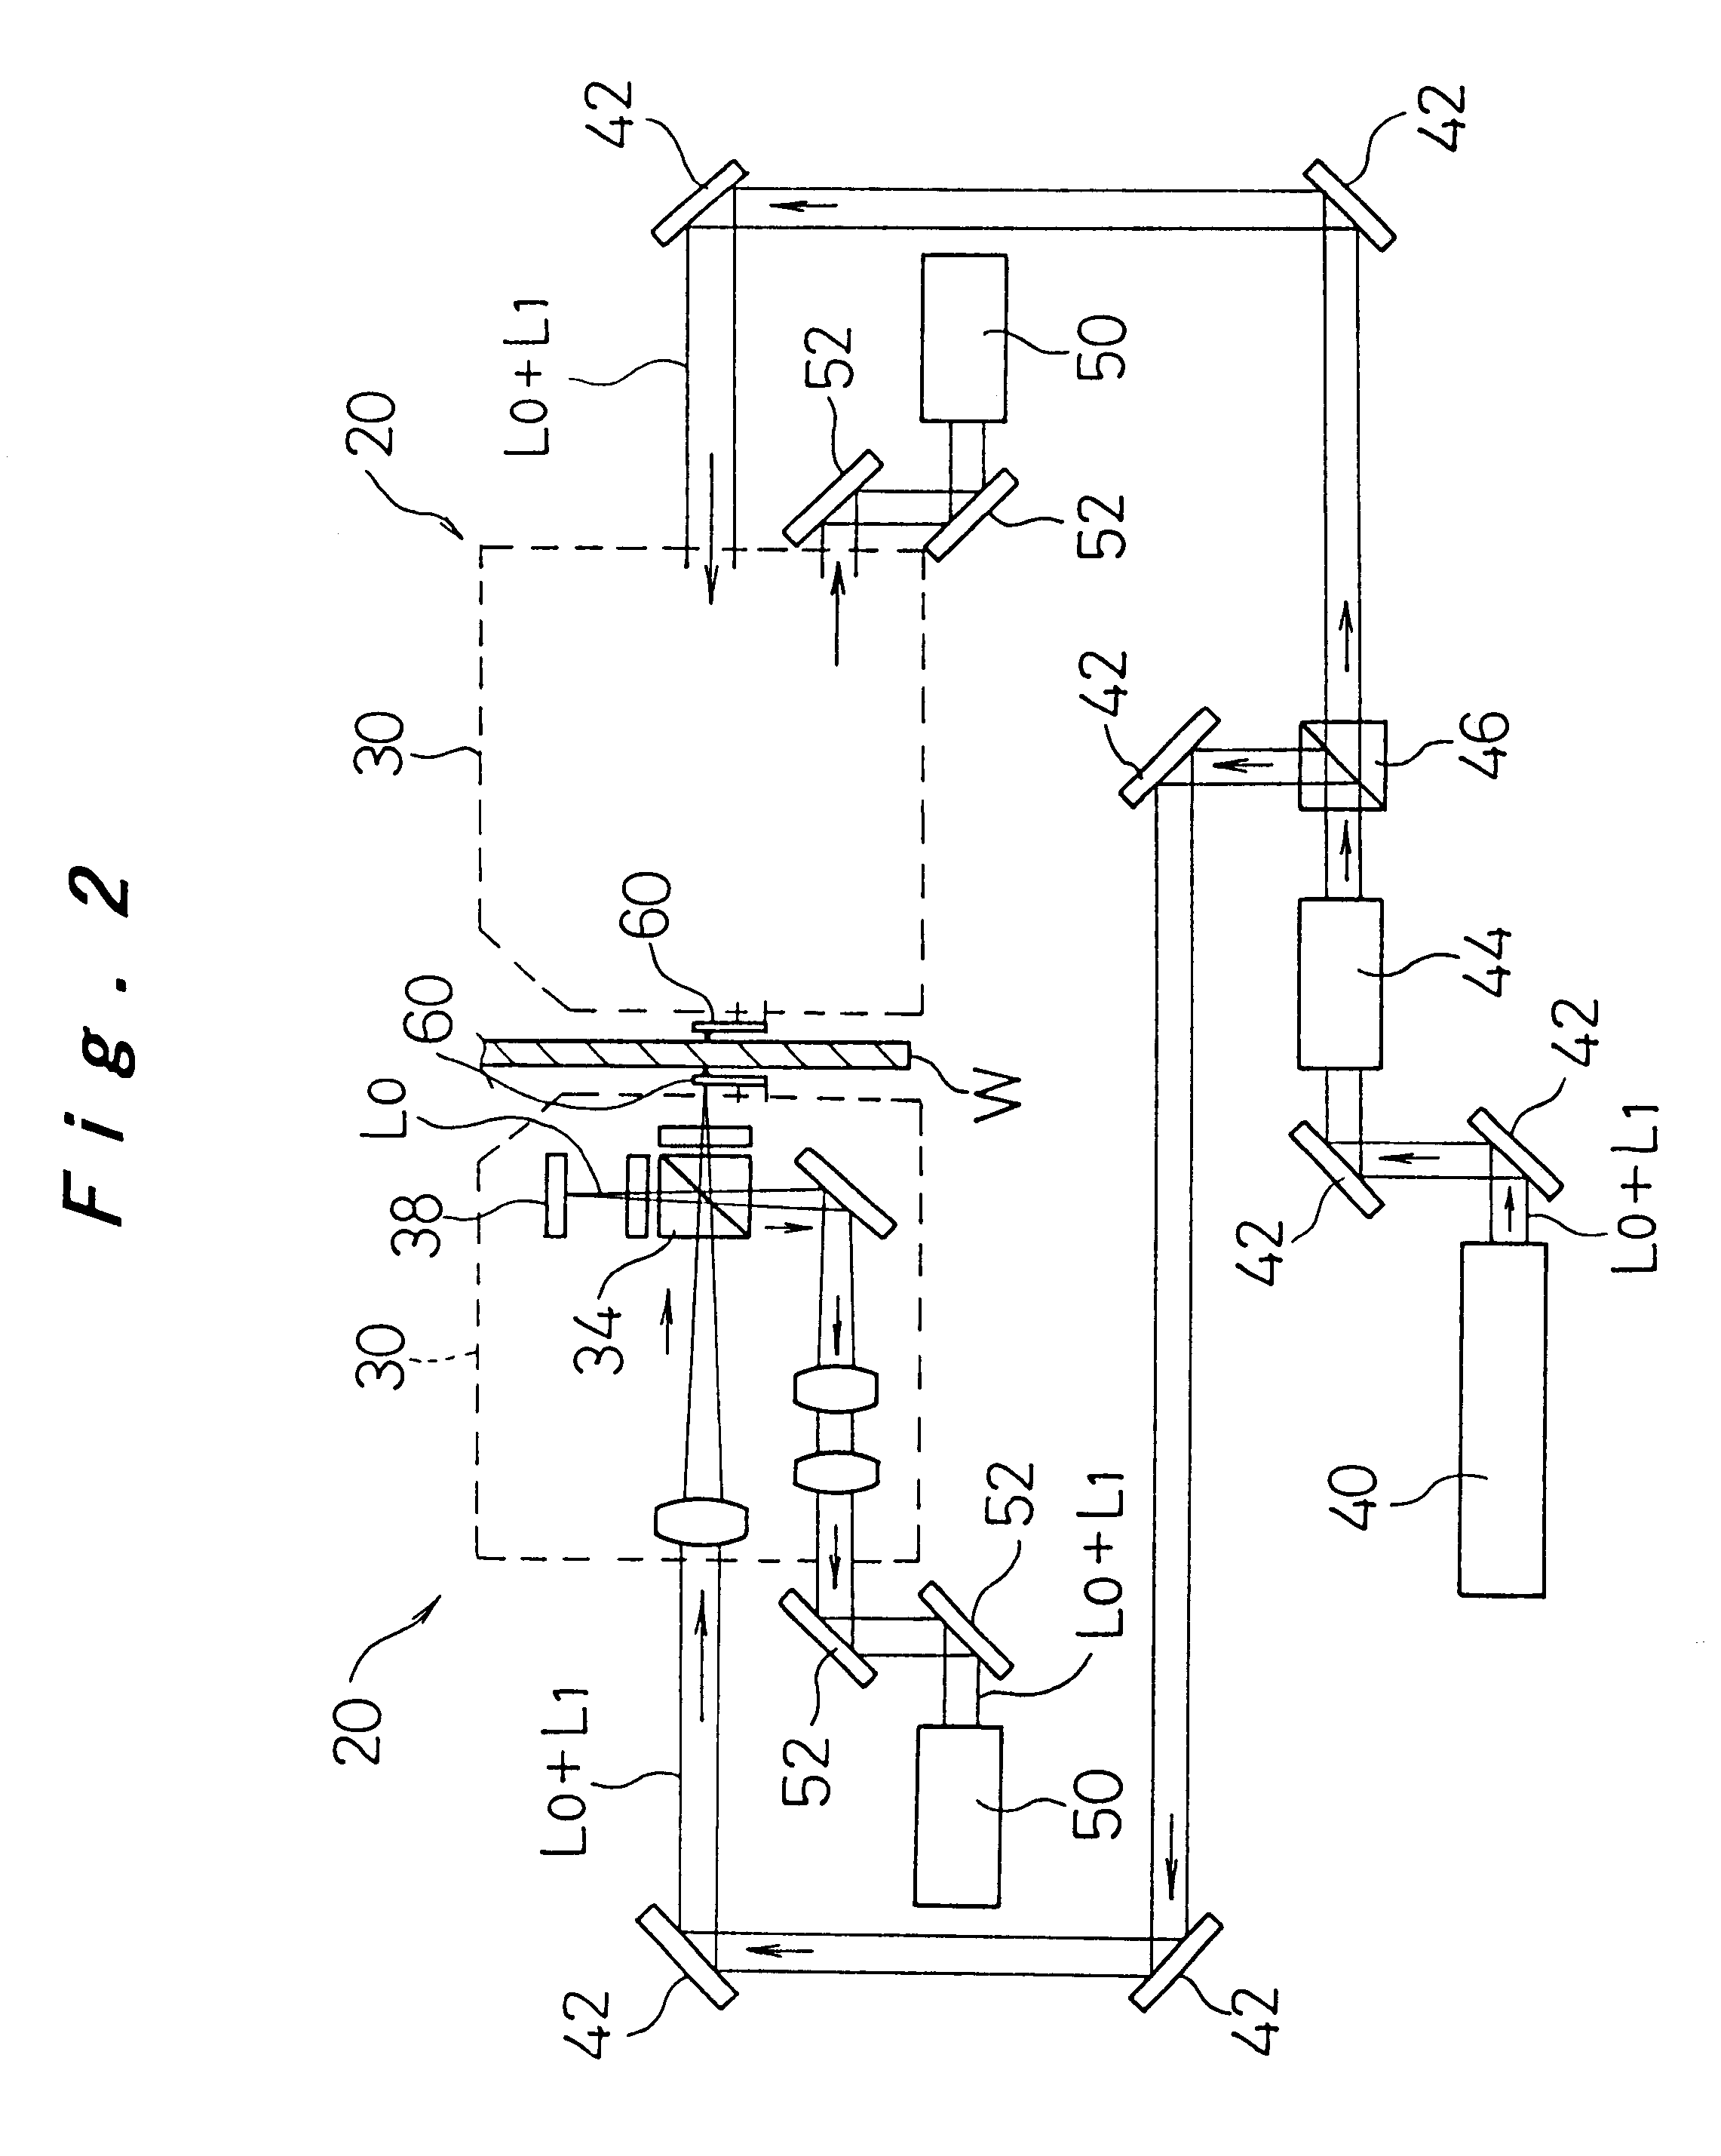 Method and apparatus for measuring thickness variation of a thin sheet material, and probe reflector used in the apparatus